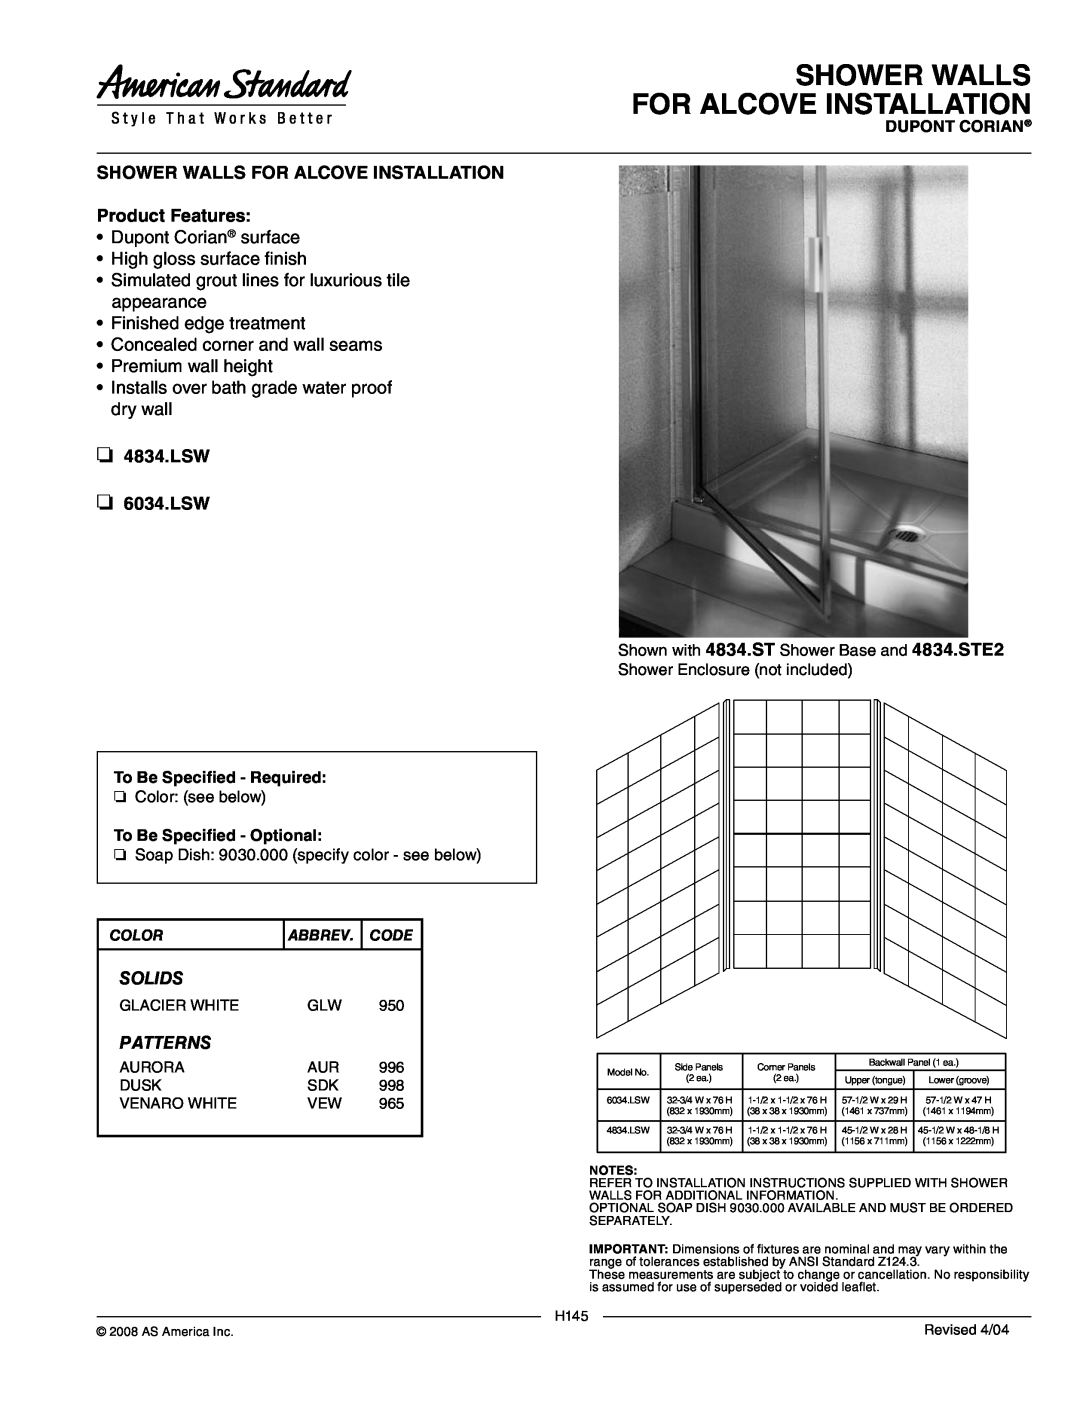 American Standard 4834.LSW installation instructions Shower Walls For Alcove Installation, Product Features, LSW 6034.LSW 